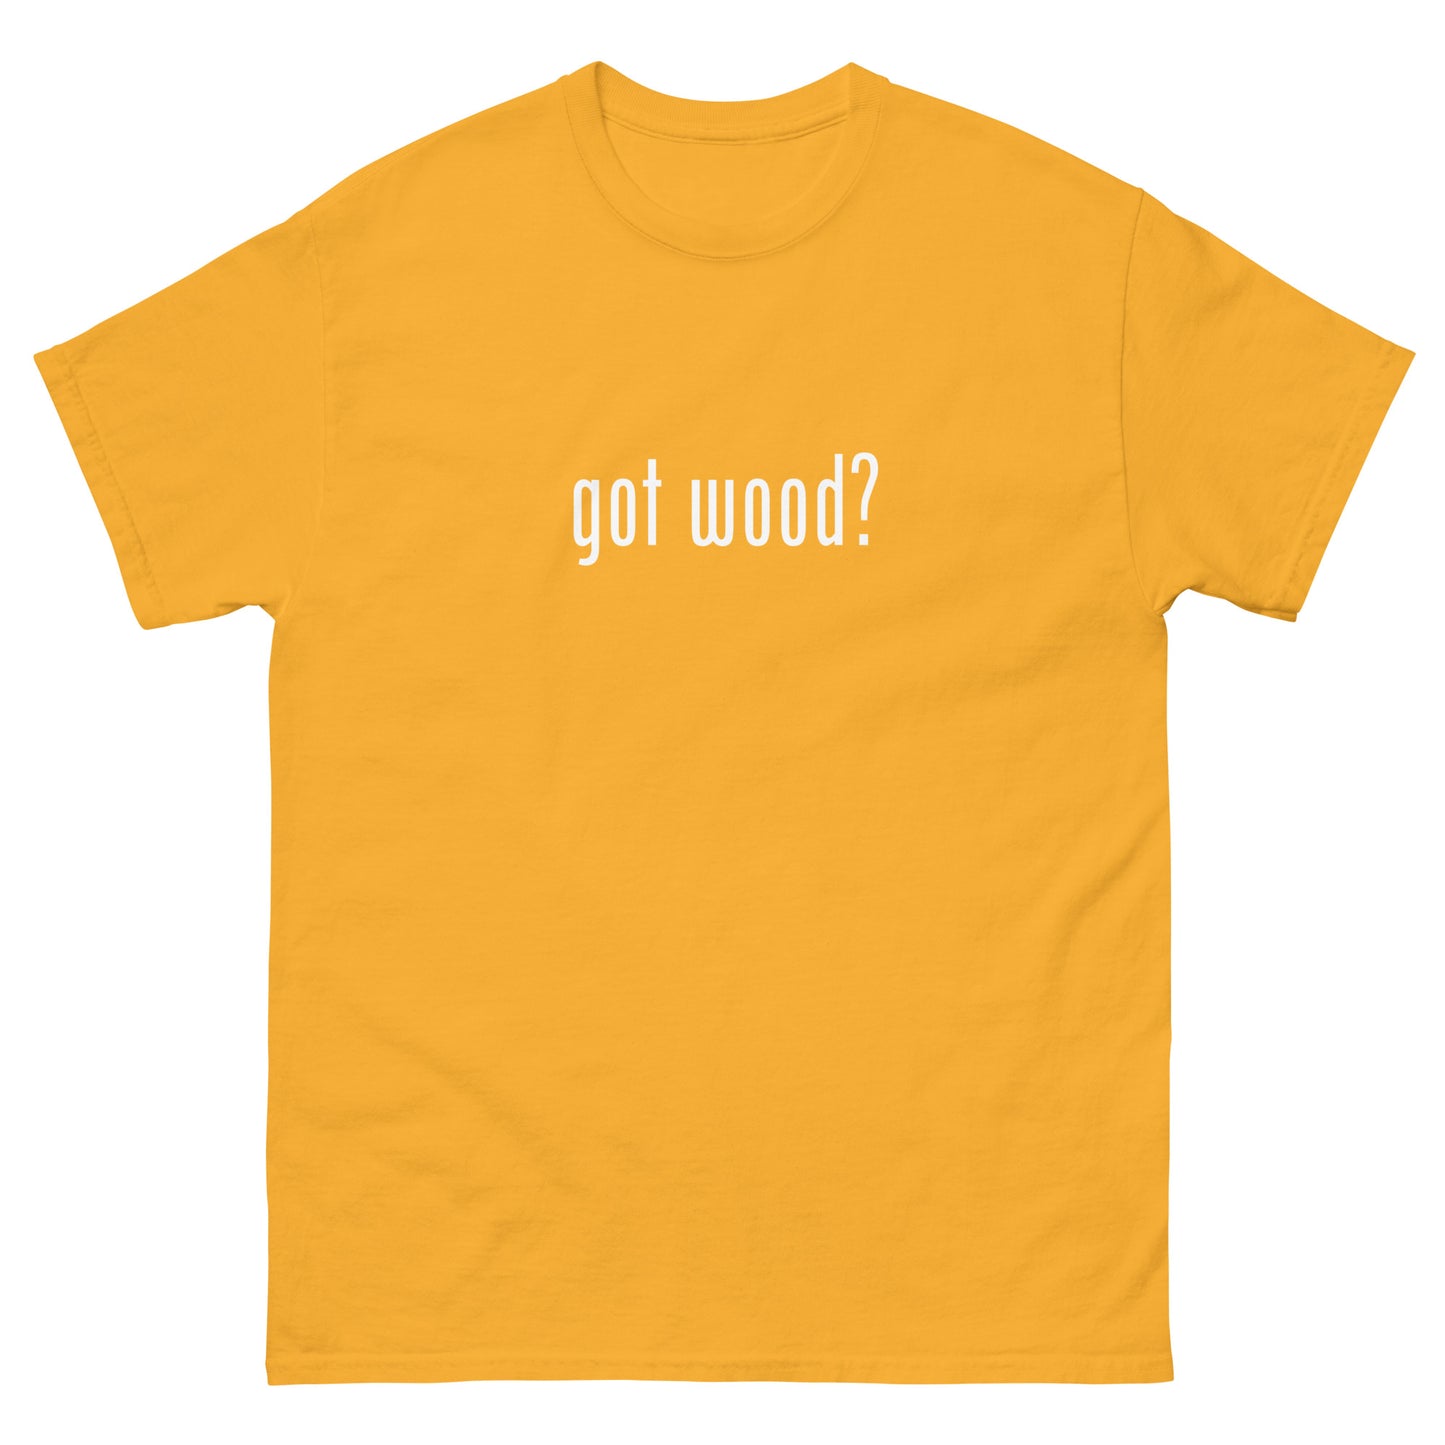 “got wood?” Woodworking T Shirt – White Ink (Multiple Colors)